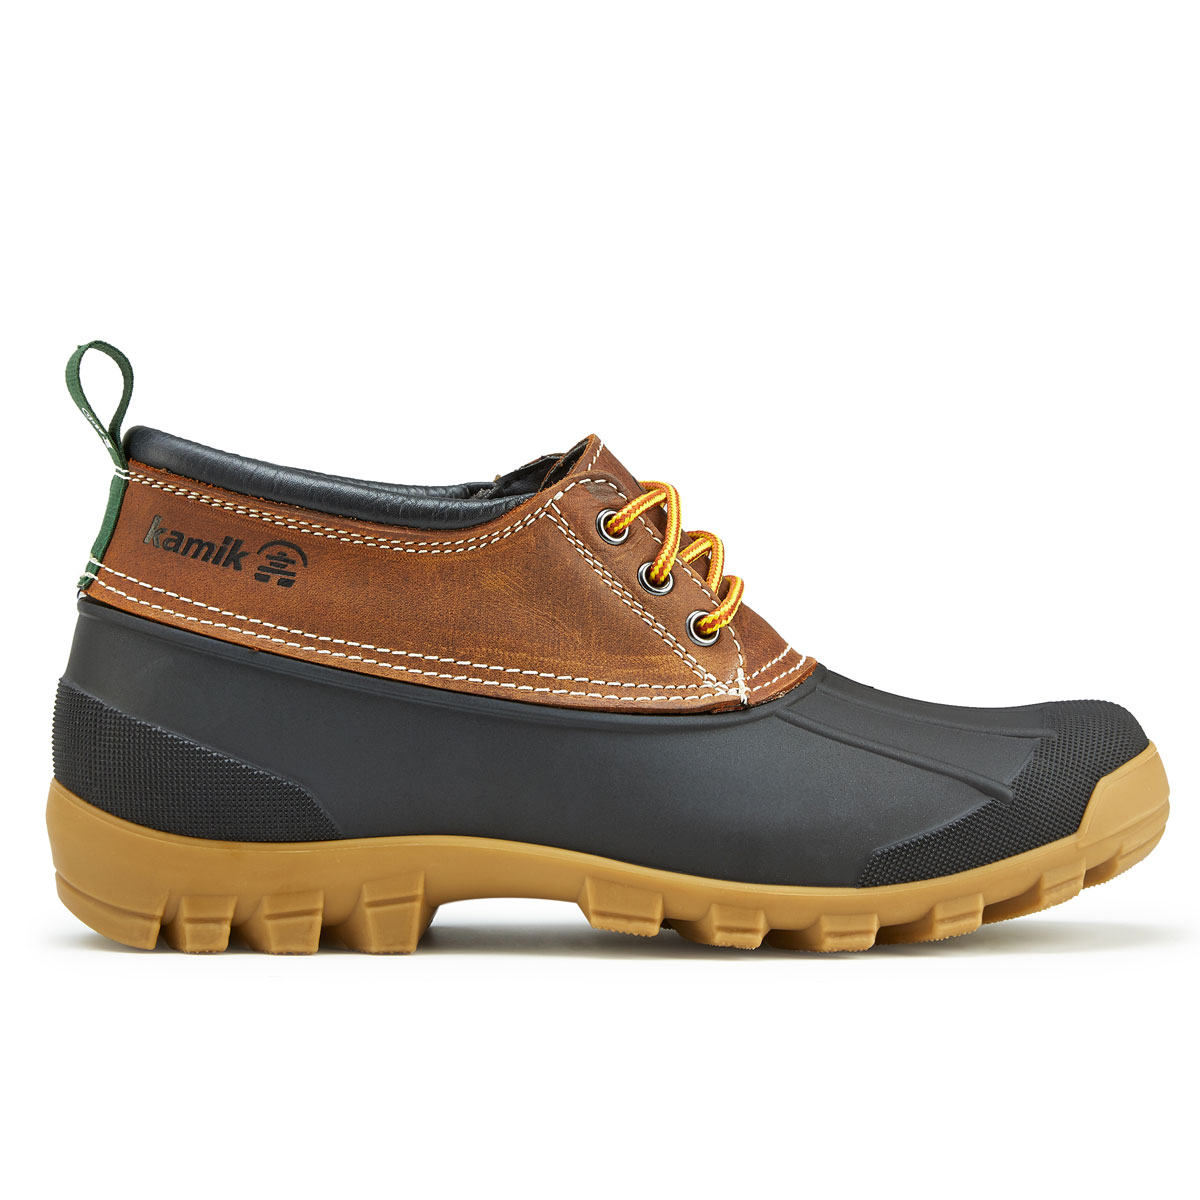 sperry duck boots low cut